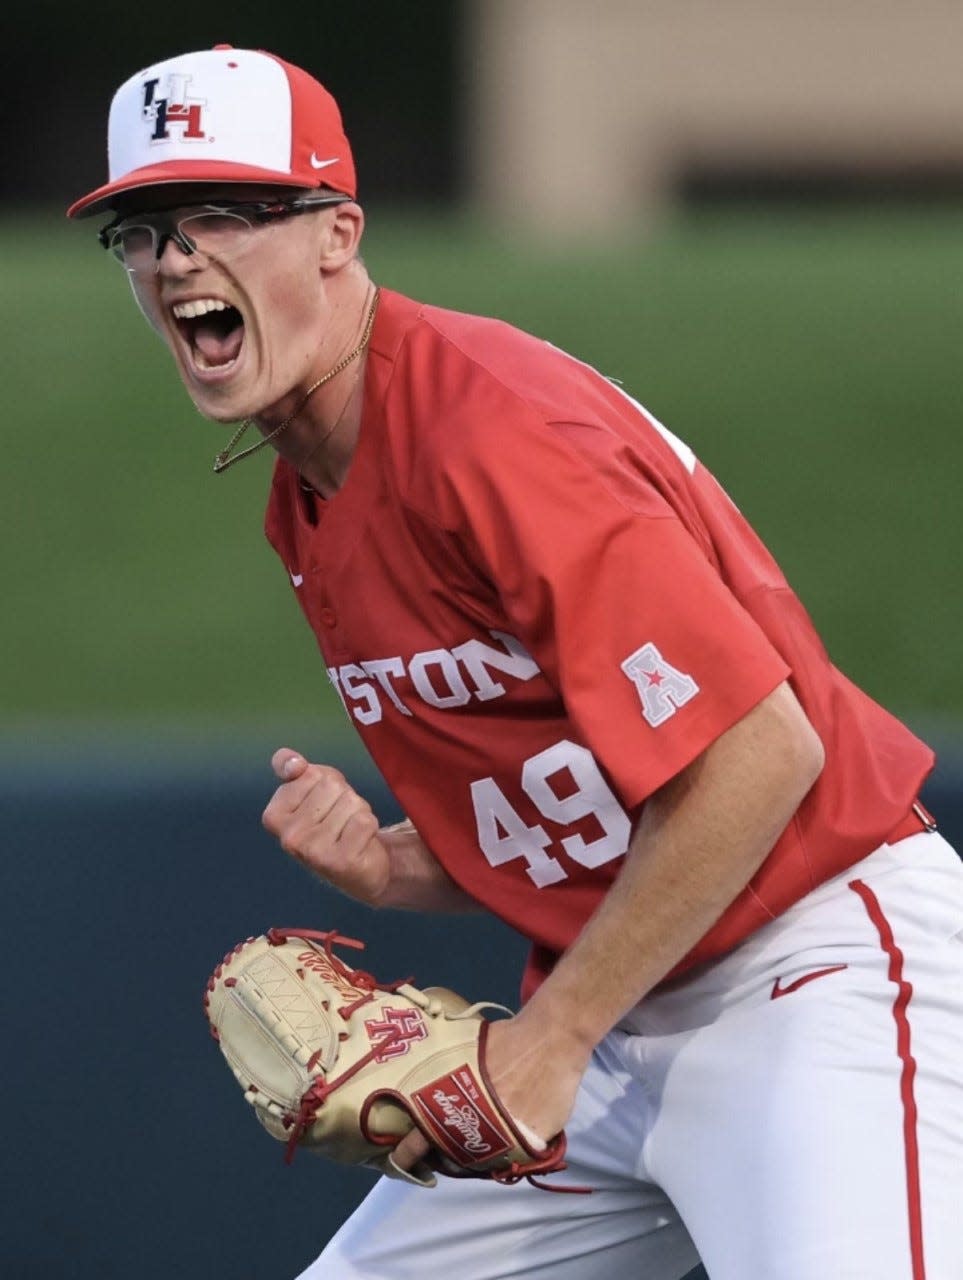 New Smyrna Beach grad Logan Clayton, who won seven games for Houston in 2022, was selected in the 17th round by the Arizona Diamondbacks.